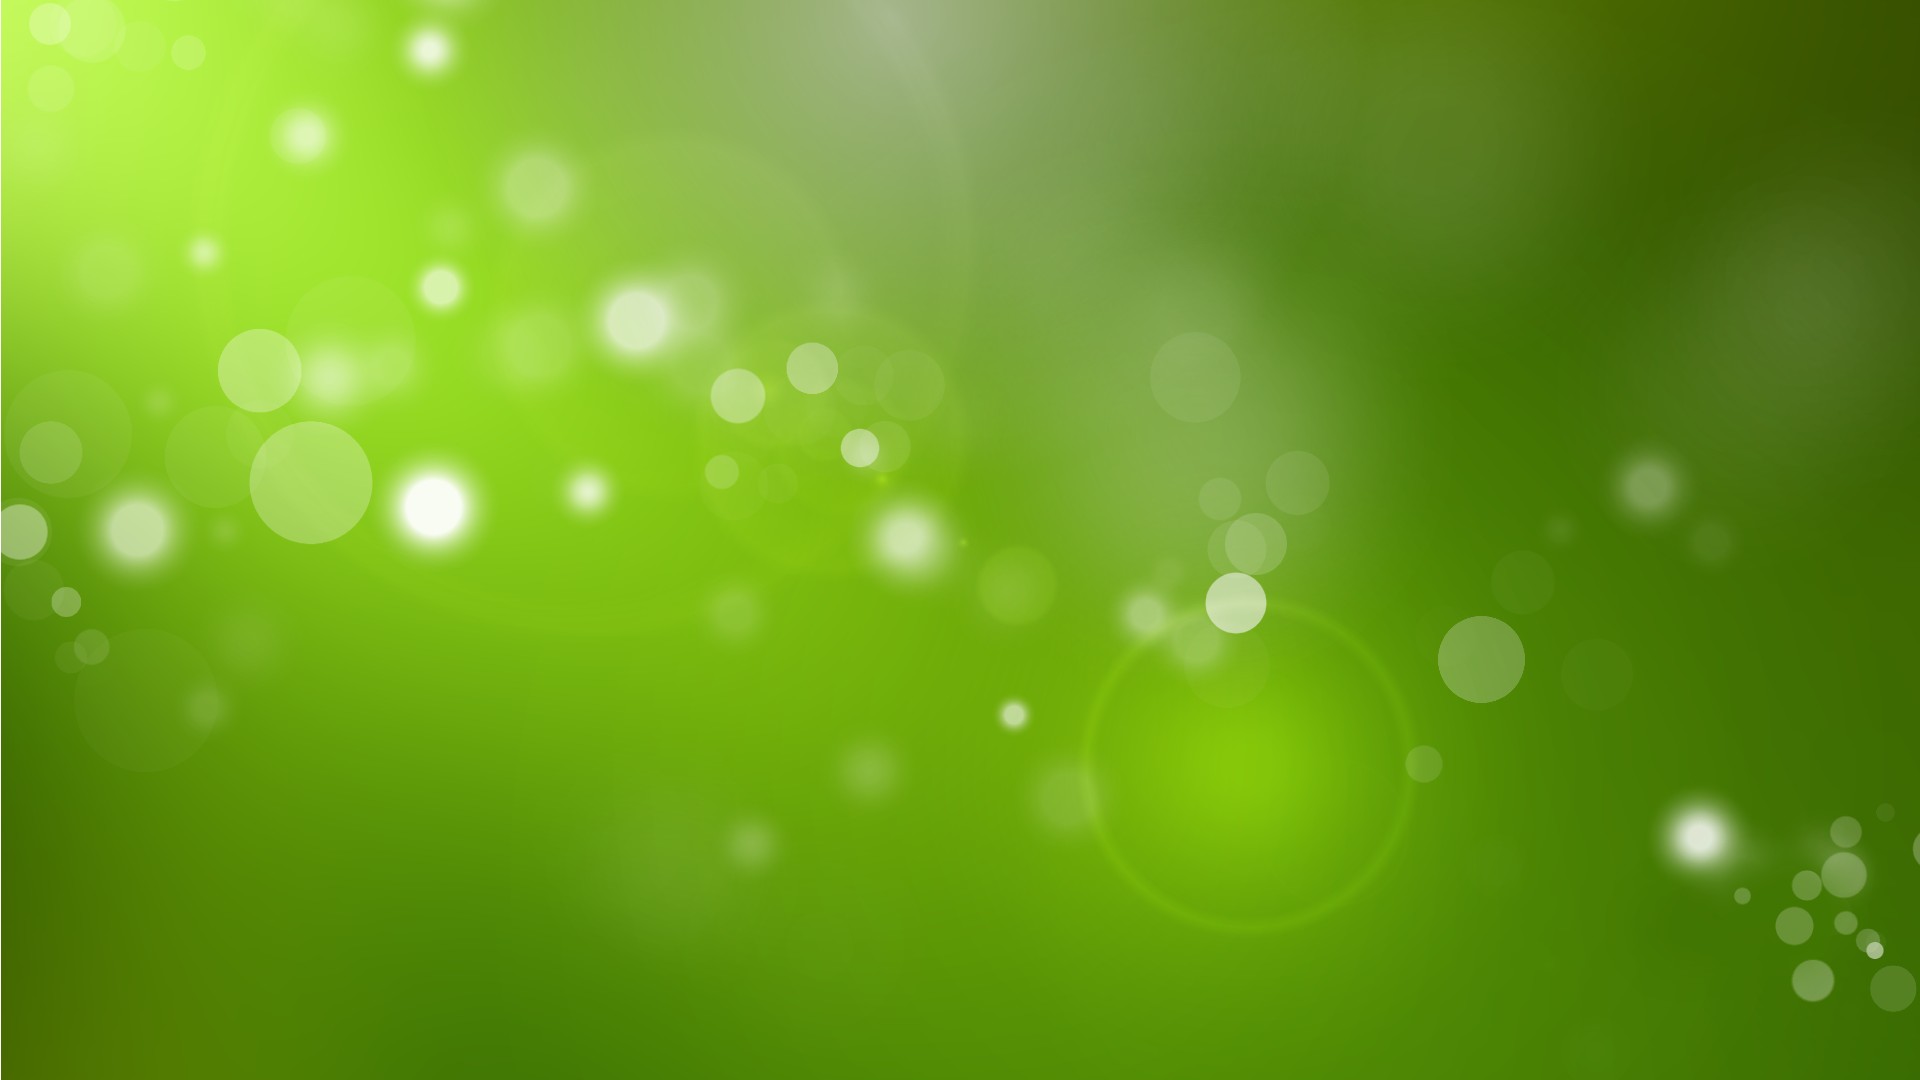 Green Colour HD Wallpaper With Resolution 1920X1080 pixel. You can make this wallpaper for your Desktop Computer Backgrounds, Mac Wallpapers, Android Lock screen or iPhone Screensavers